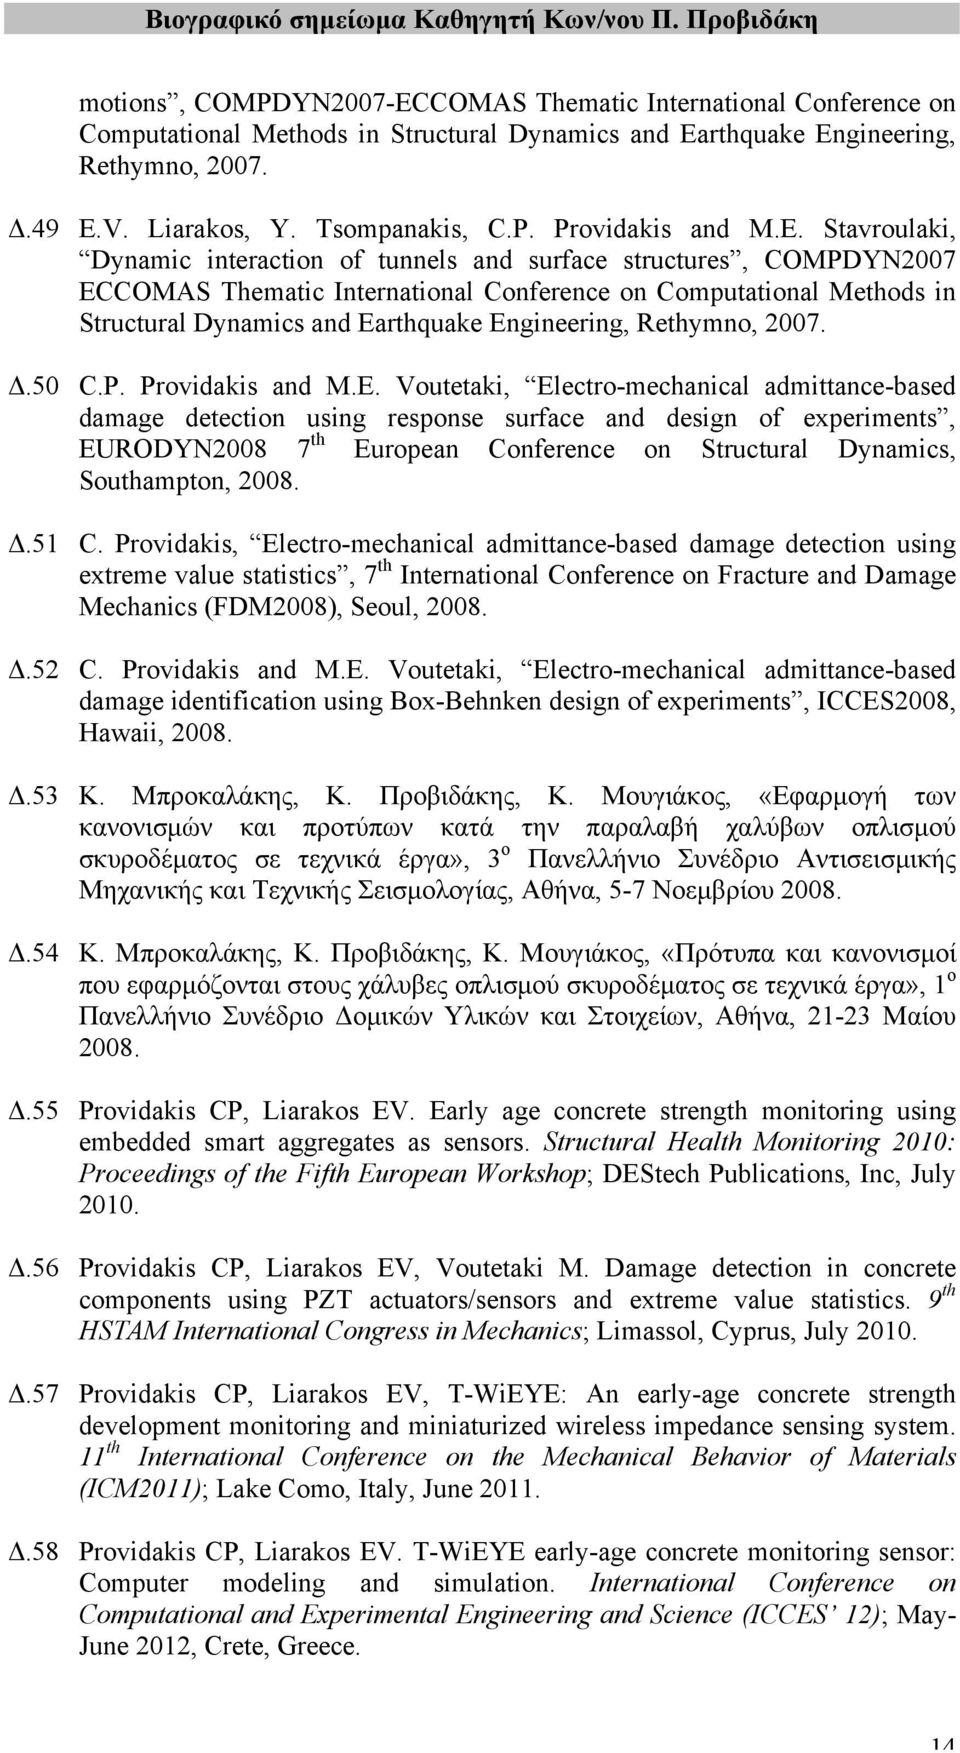 Engineering, Rethymno, 2007. Δ.50 C.P. Providakis and M.E. Voutetaki, Electro-mechanical admittance-based damage detection using response surface and design of experiments, EURODYN2008 7 th European Conference on Structural Dynamics, Southampton, 2008.